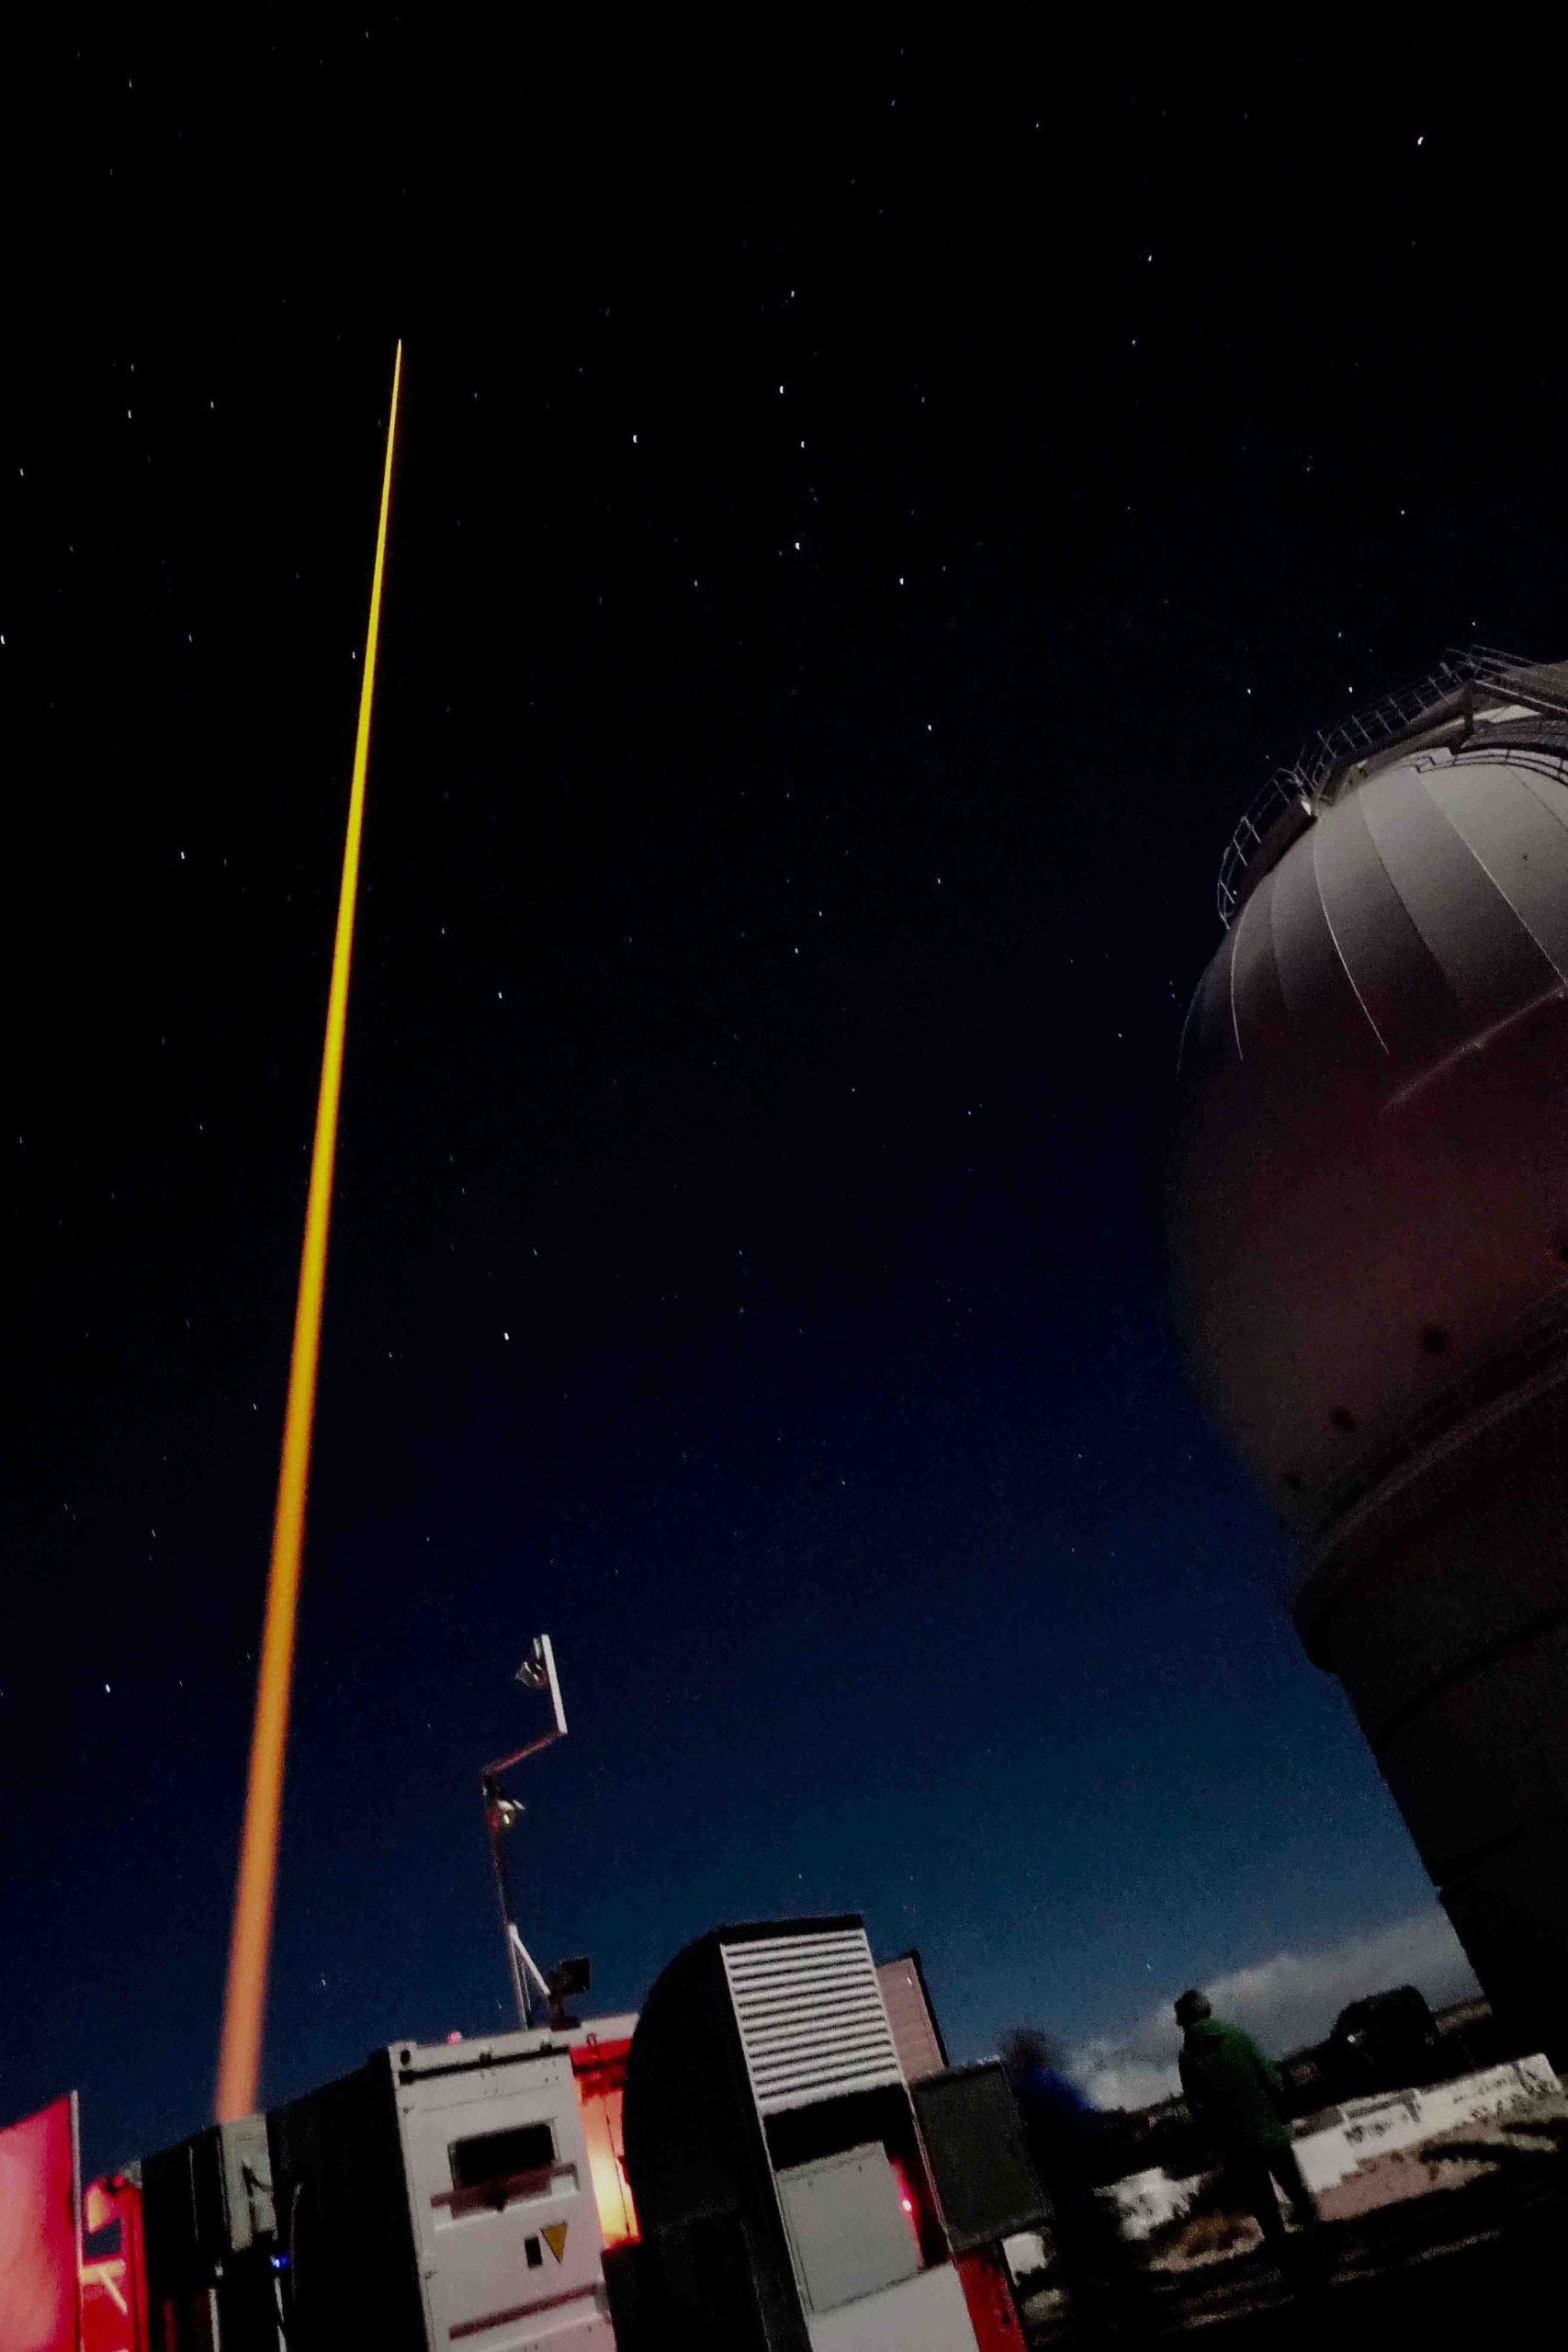 Night sky with orange-gold laser shooting vertically